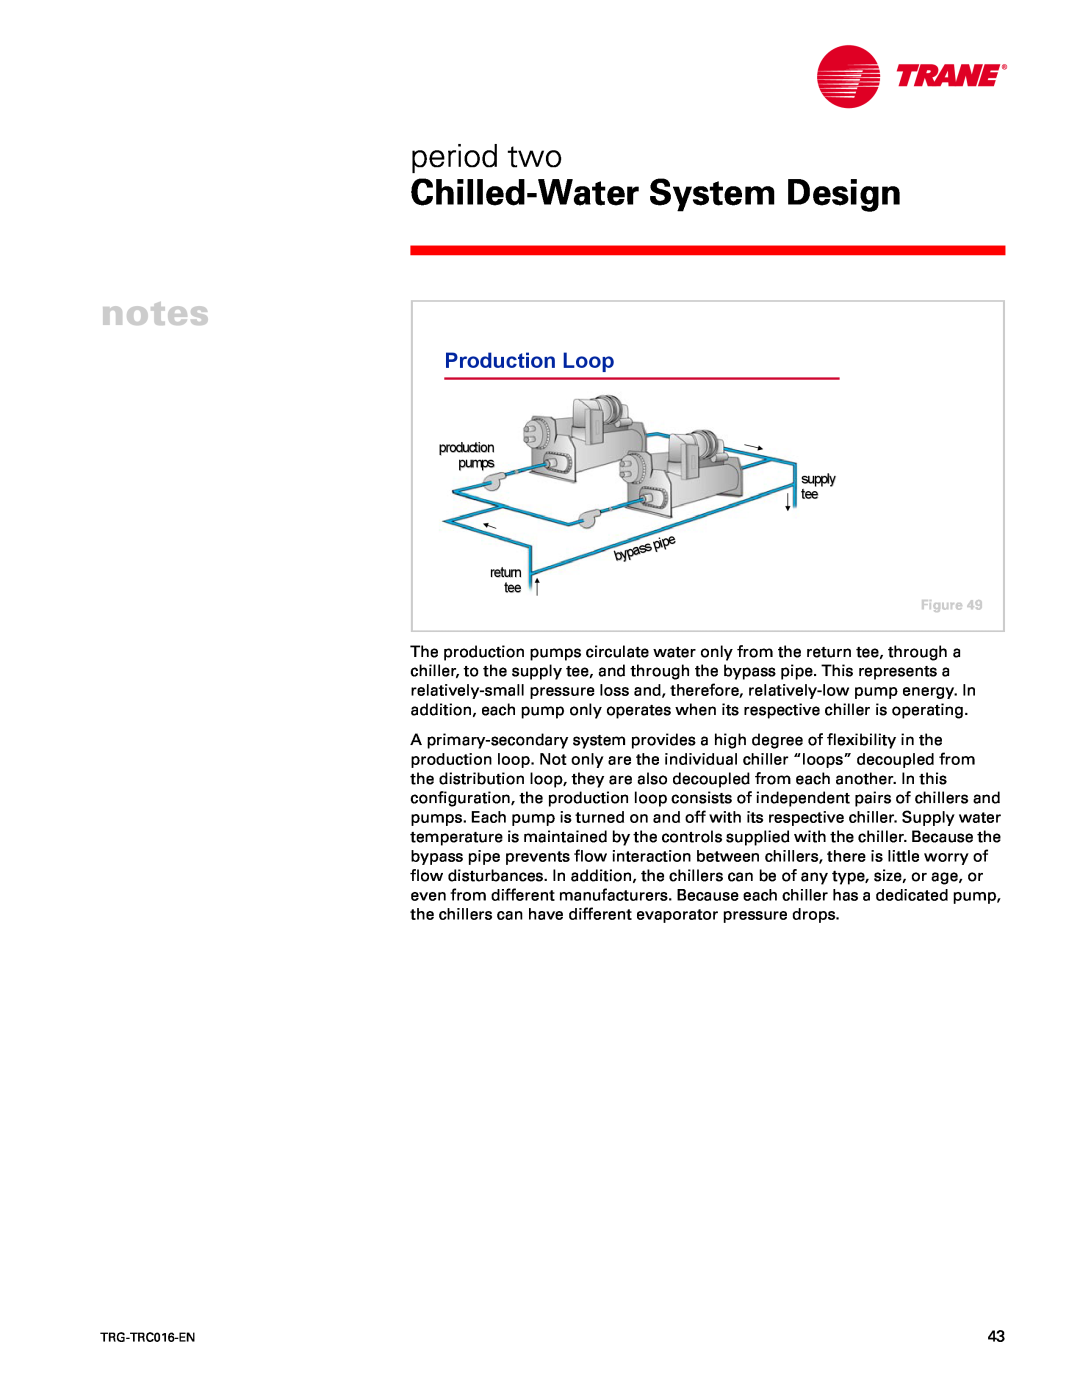 Trane TRG-TRC016-EN manual Production Loop, notes, Chilled-WaterSystem Design, period two 